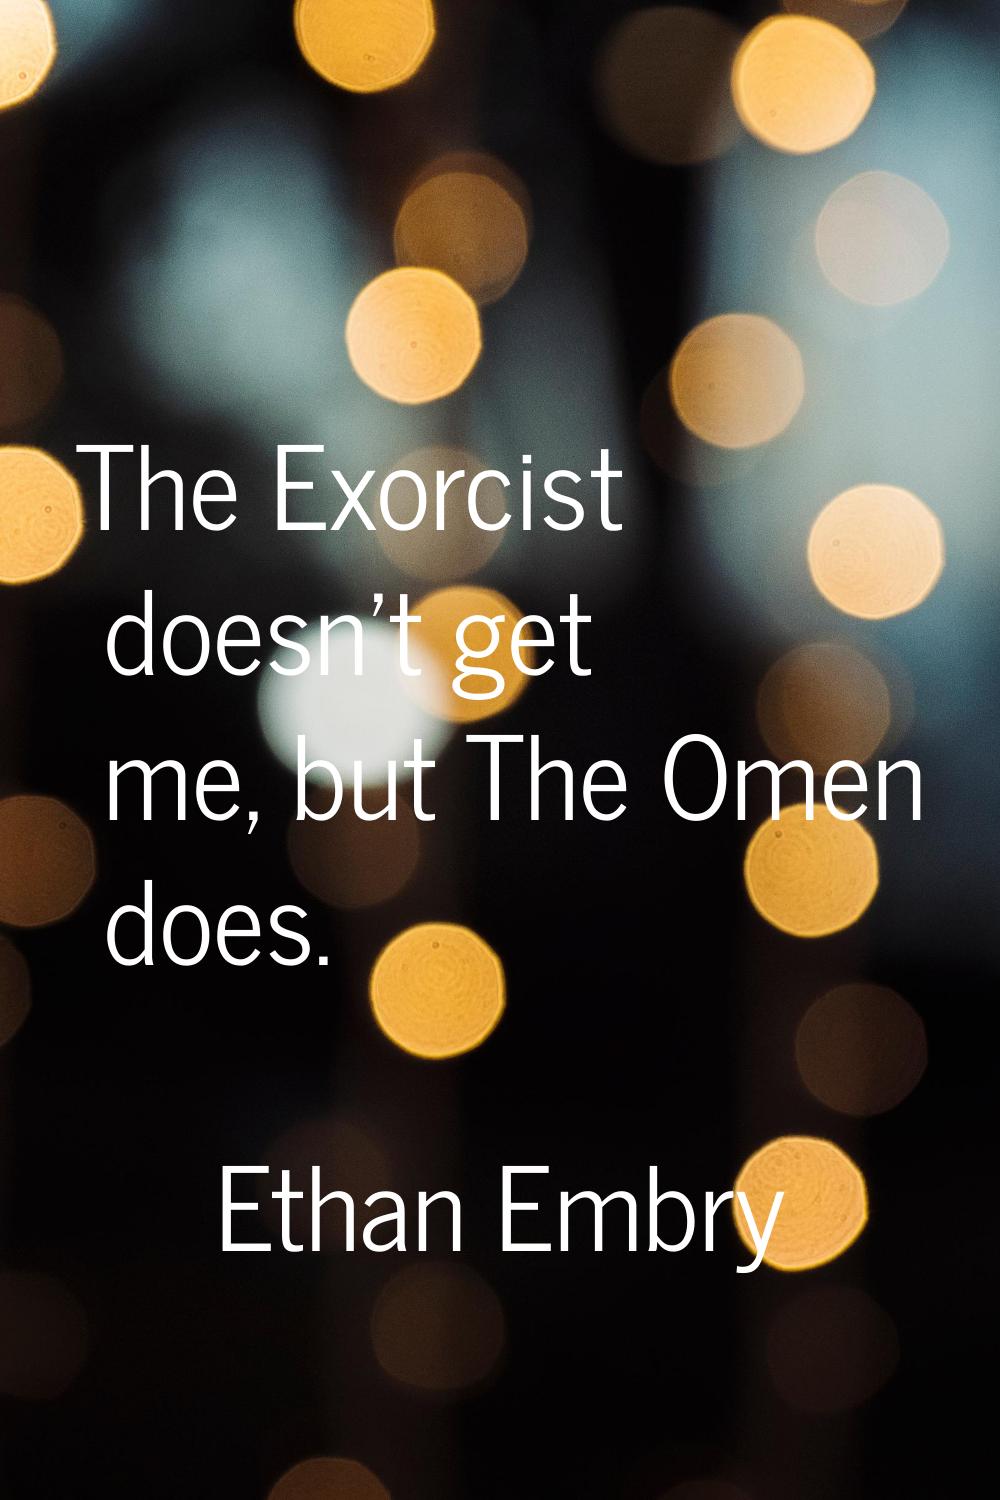 The Exorcist doesn't get me, but The Omen does.